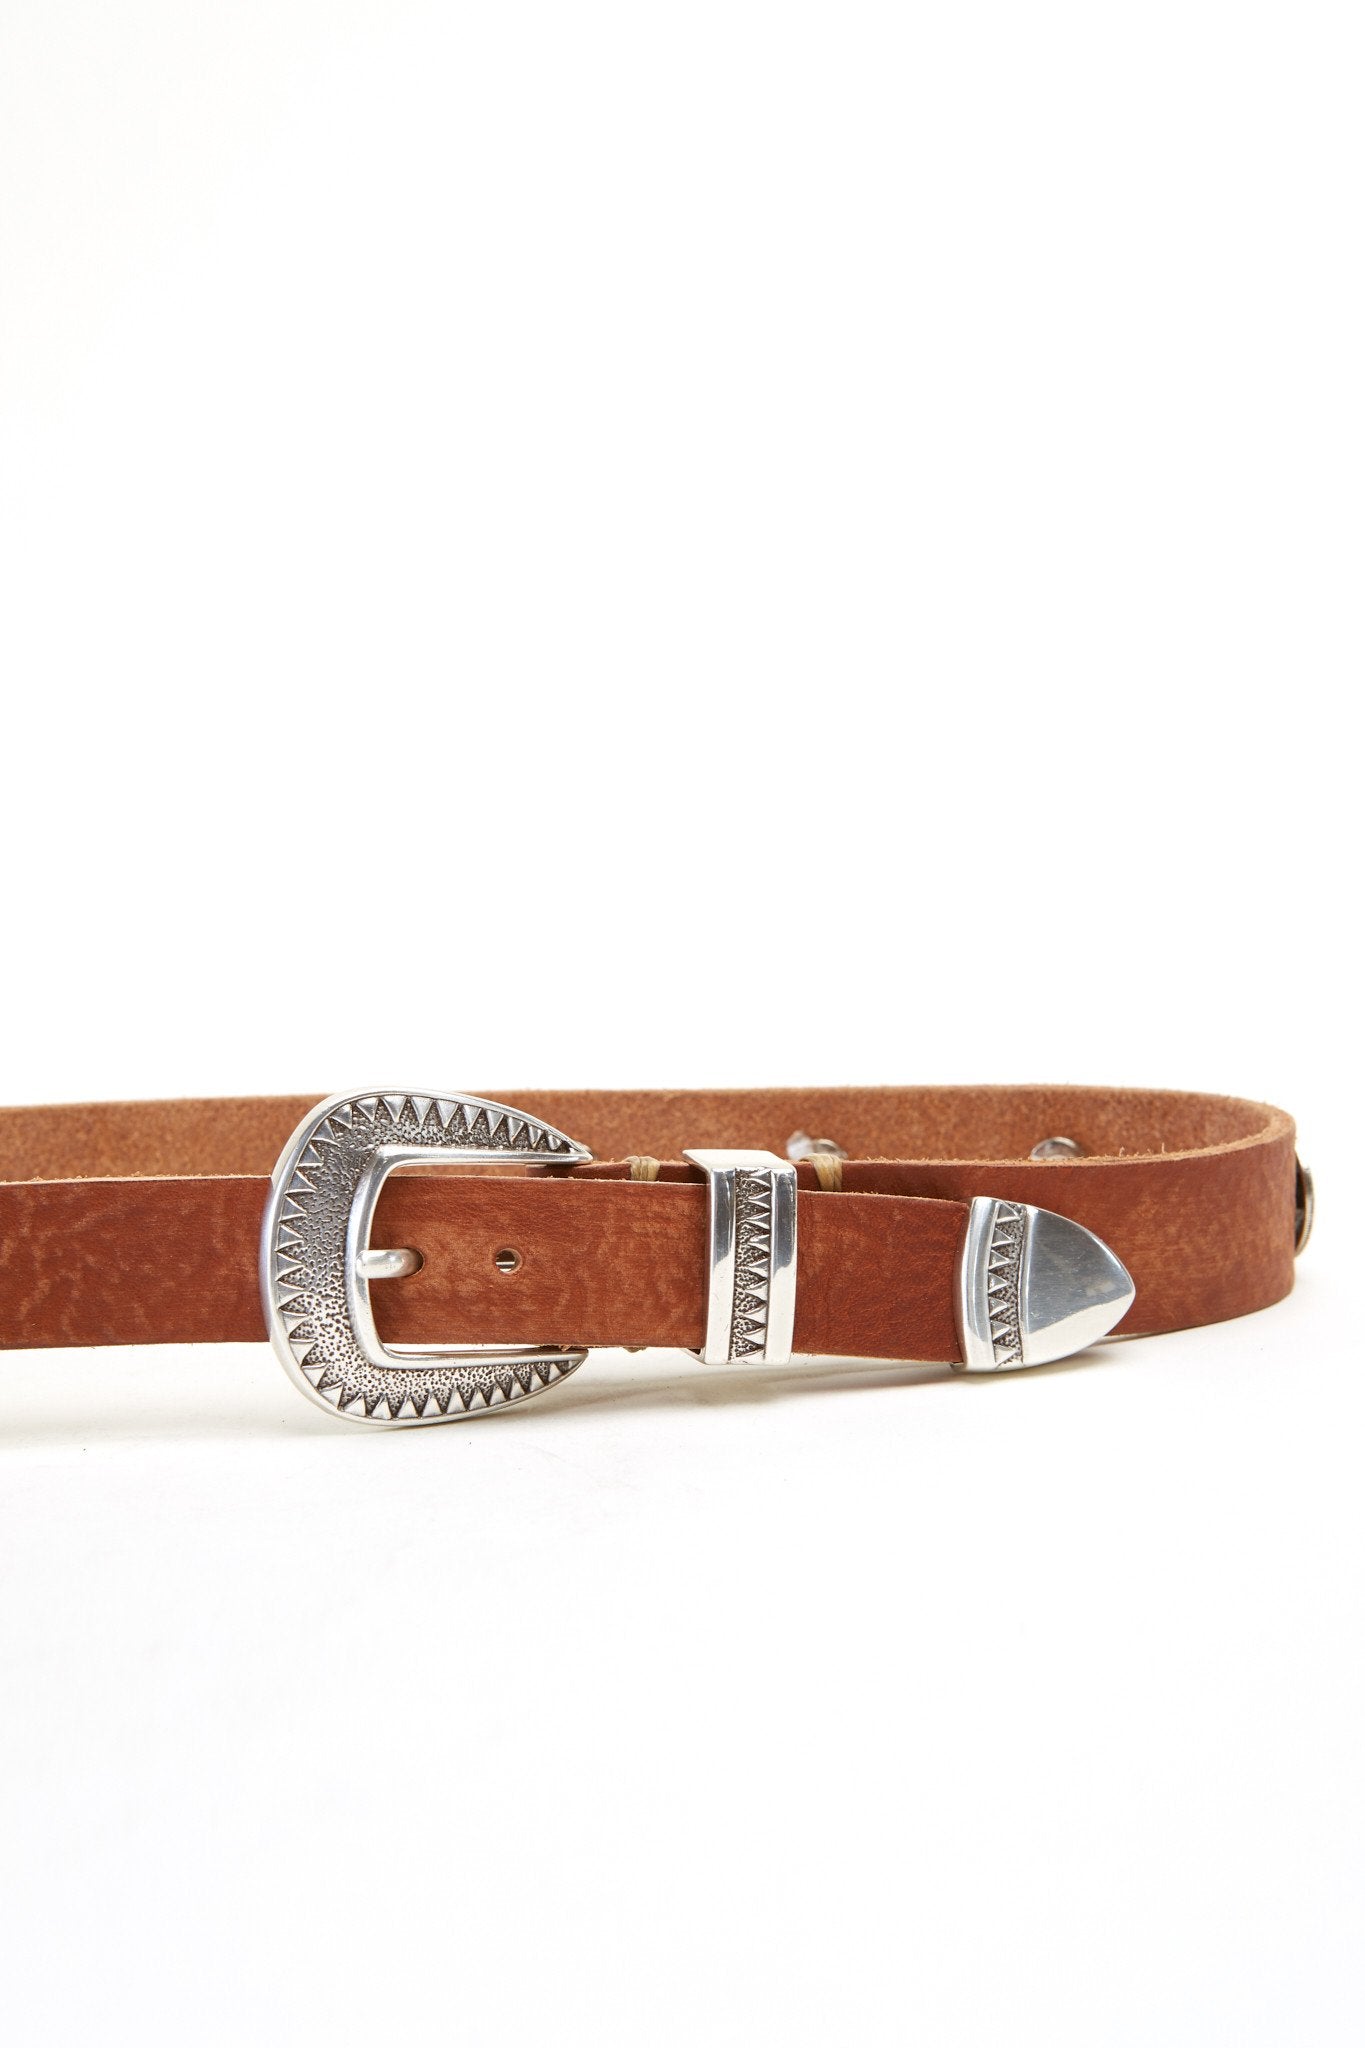 THE SUNNY SIDE DOUBLE BUCKLE BELT